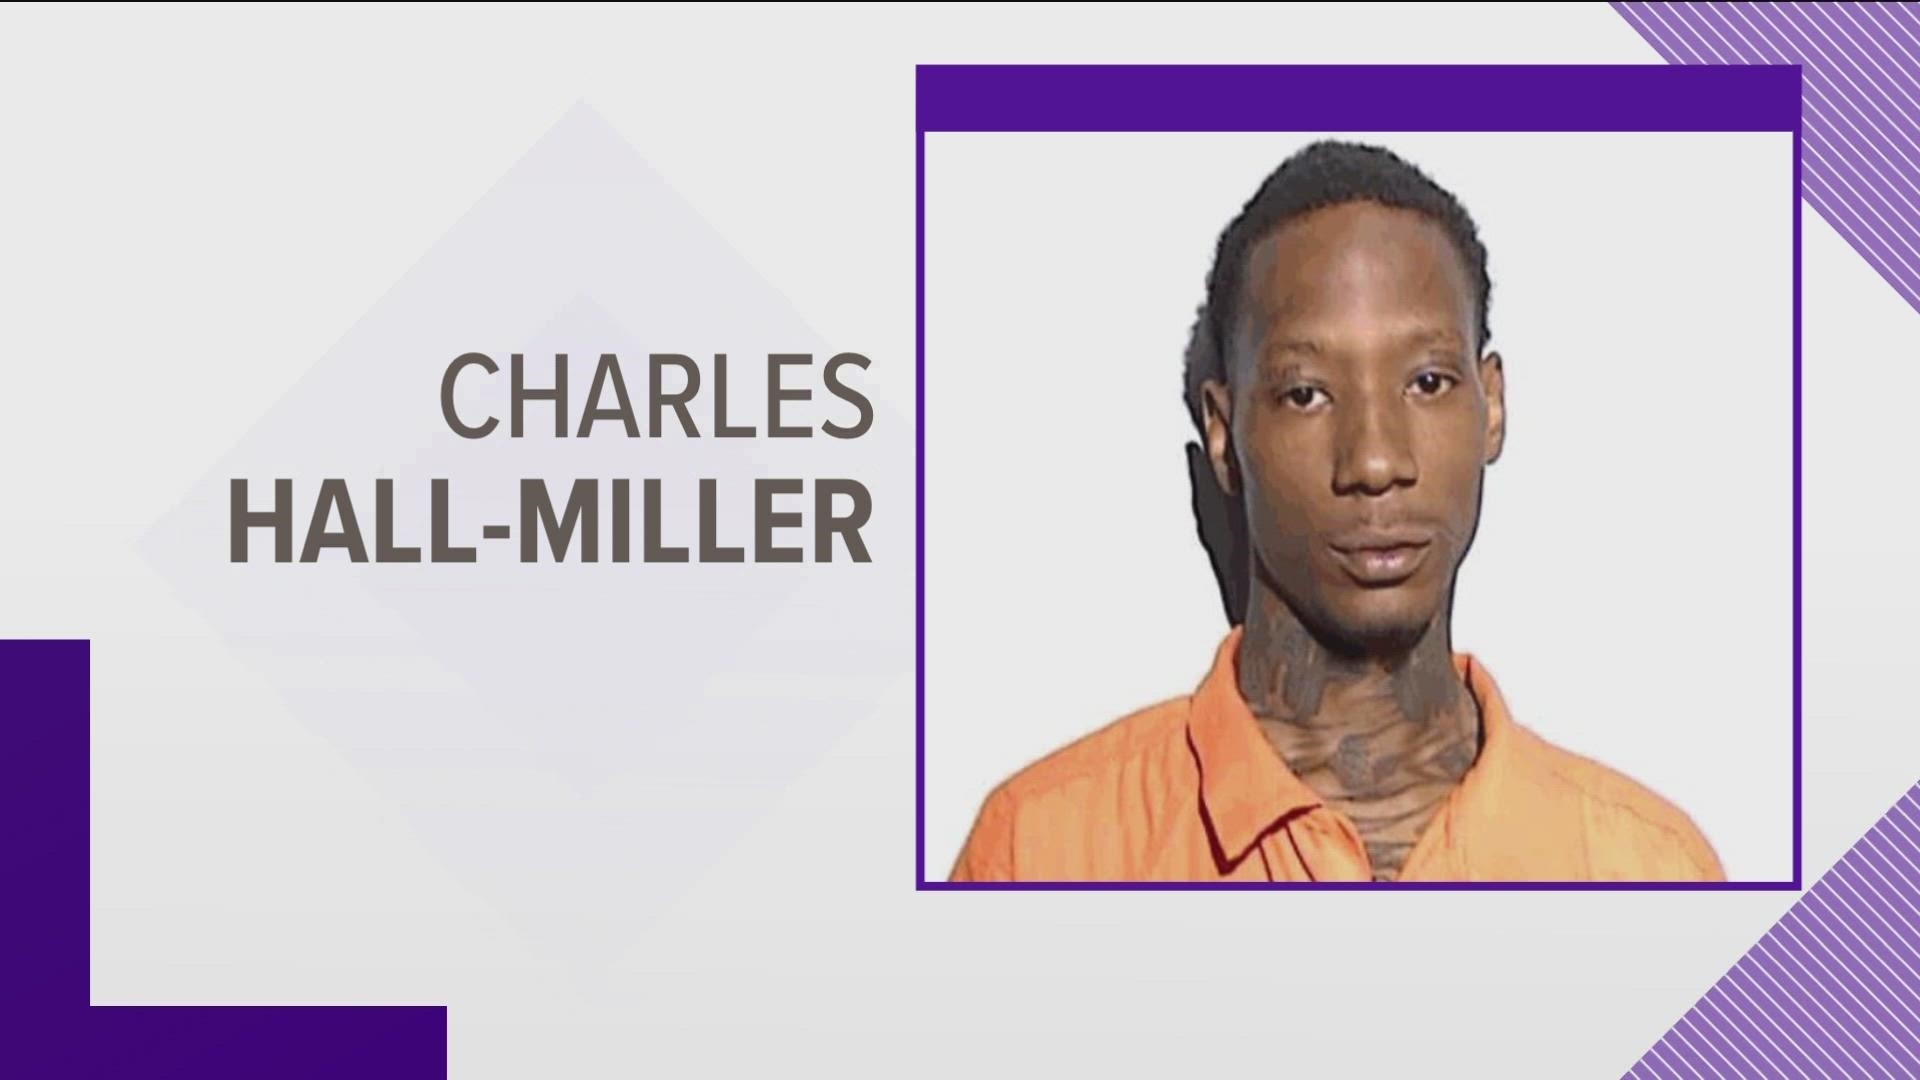 Charles Hall-Miller is accused of setting fire to a unit at Regina Manor and leaving multiple messages to the person who lives there.